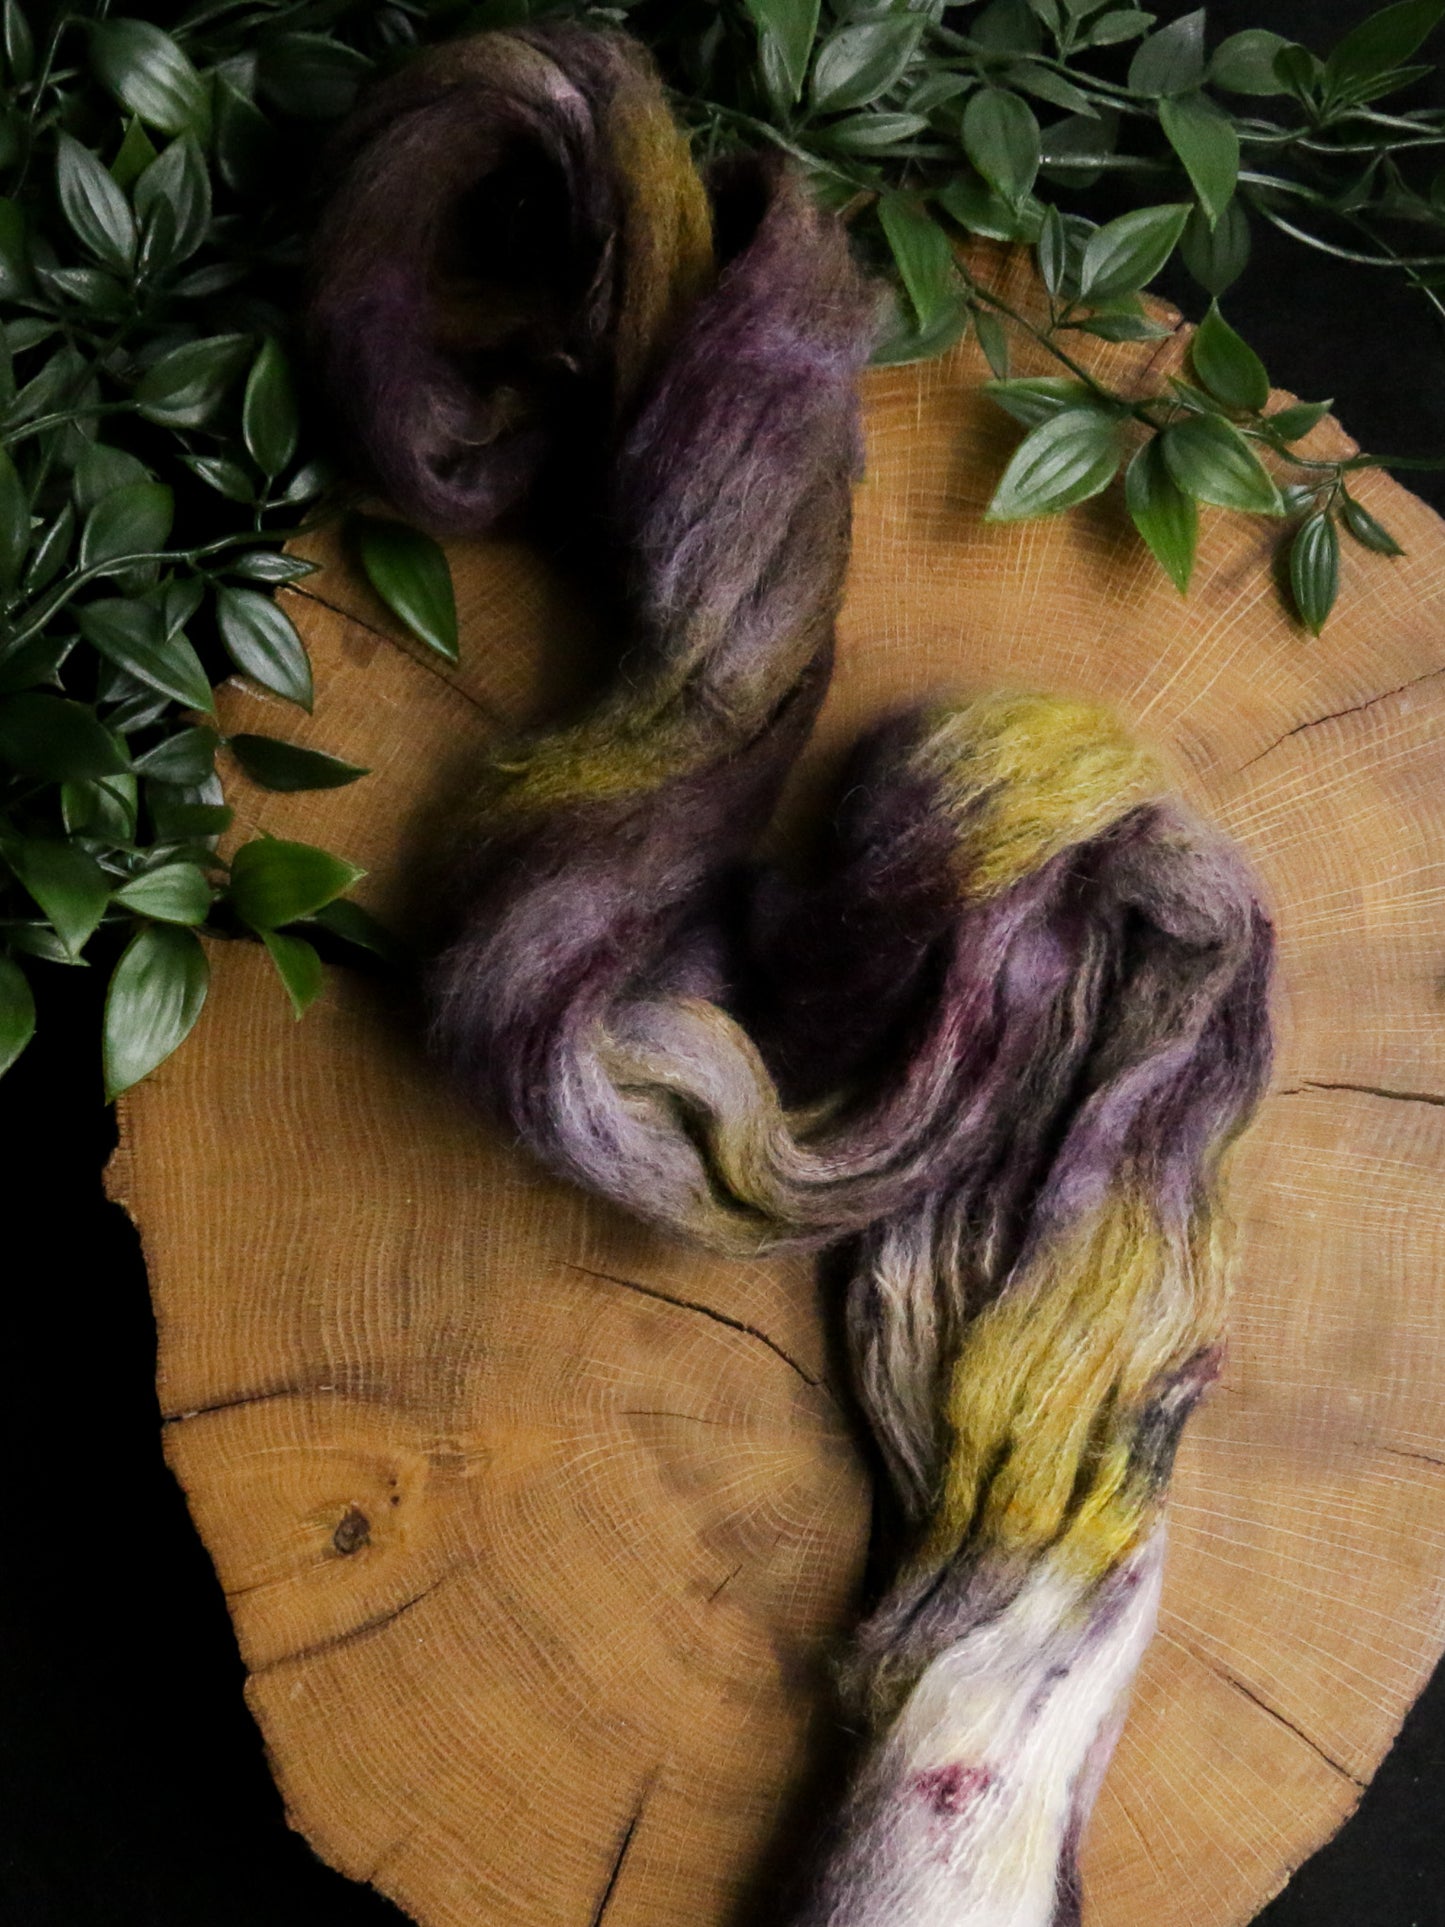 Haunted Forest - Suri Alpaca Lace - Lace Weight